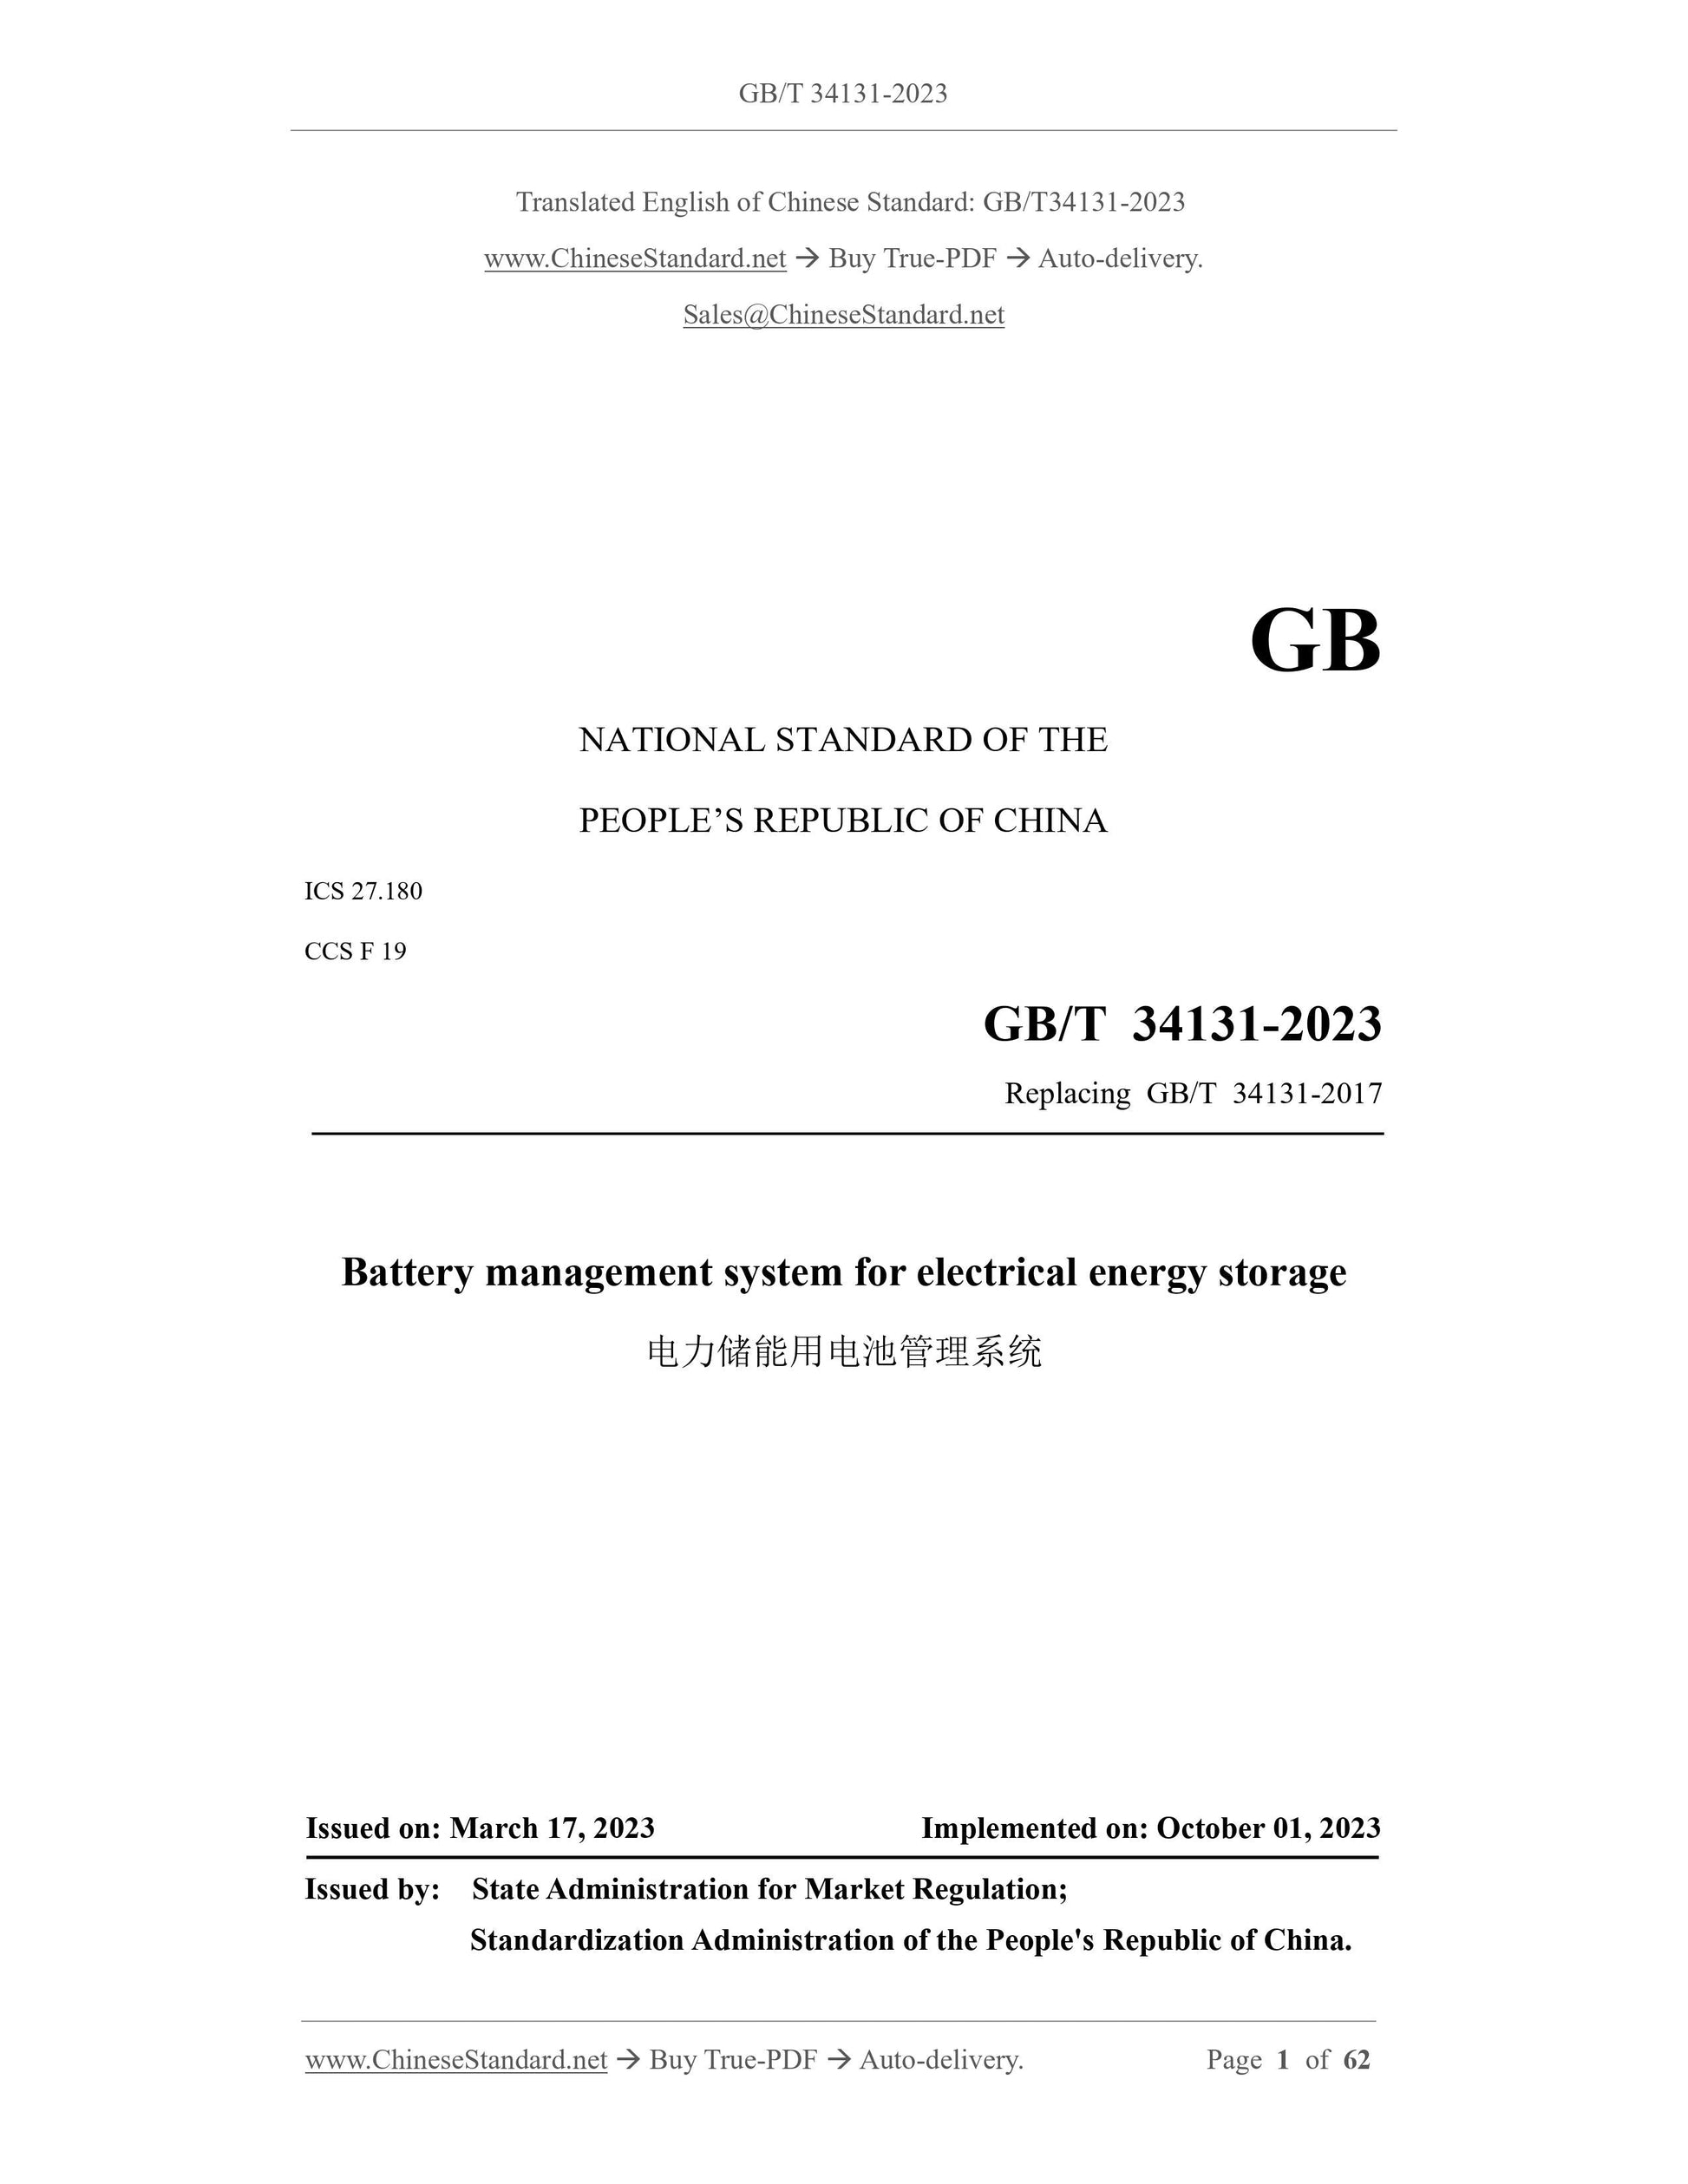 GB/T 34131-2023 Page 1